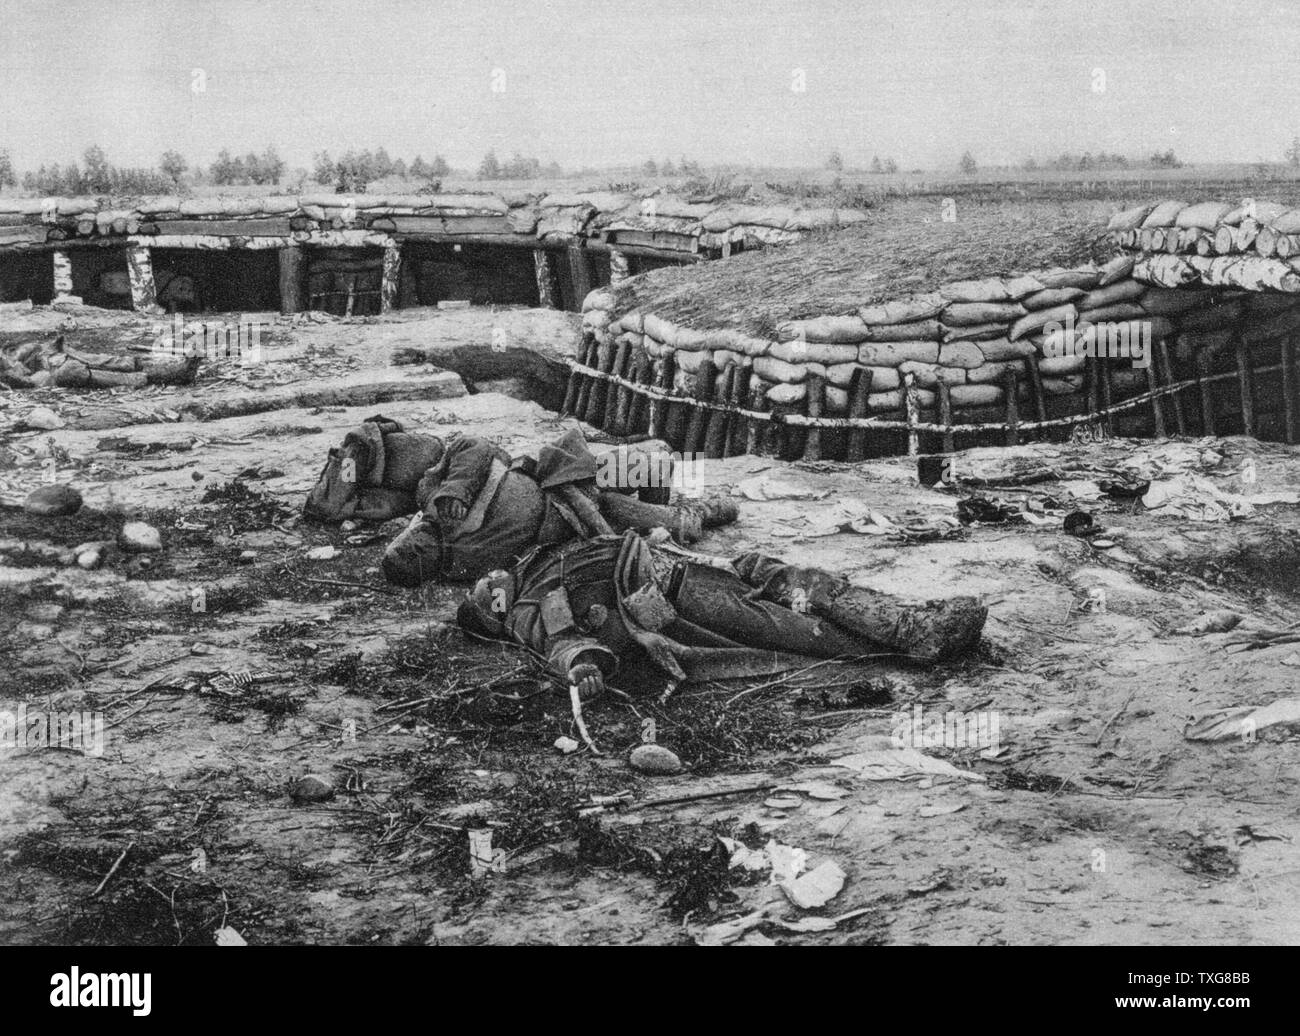 World War I   : Eastern Front. Russian soldiers abandoned in the face of German advance through Poland (July-August 1915)   Battlefield Trench Soldier Dead Body Stock Photo